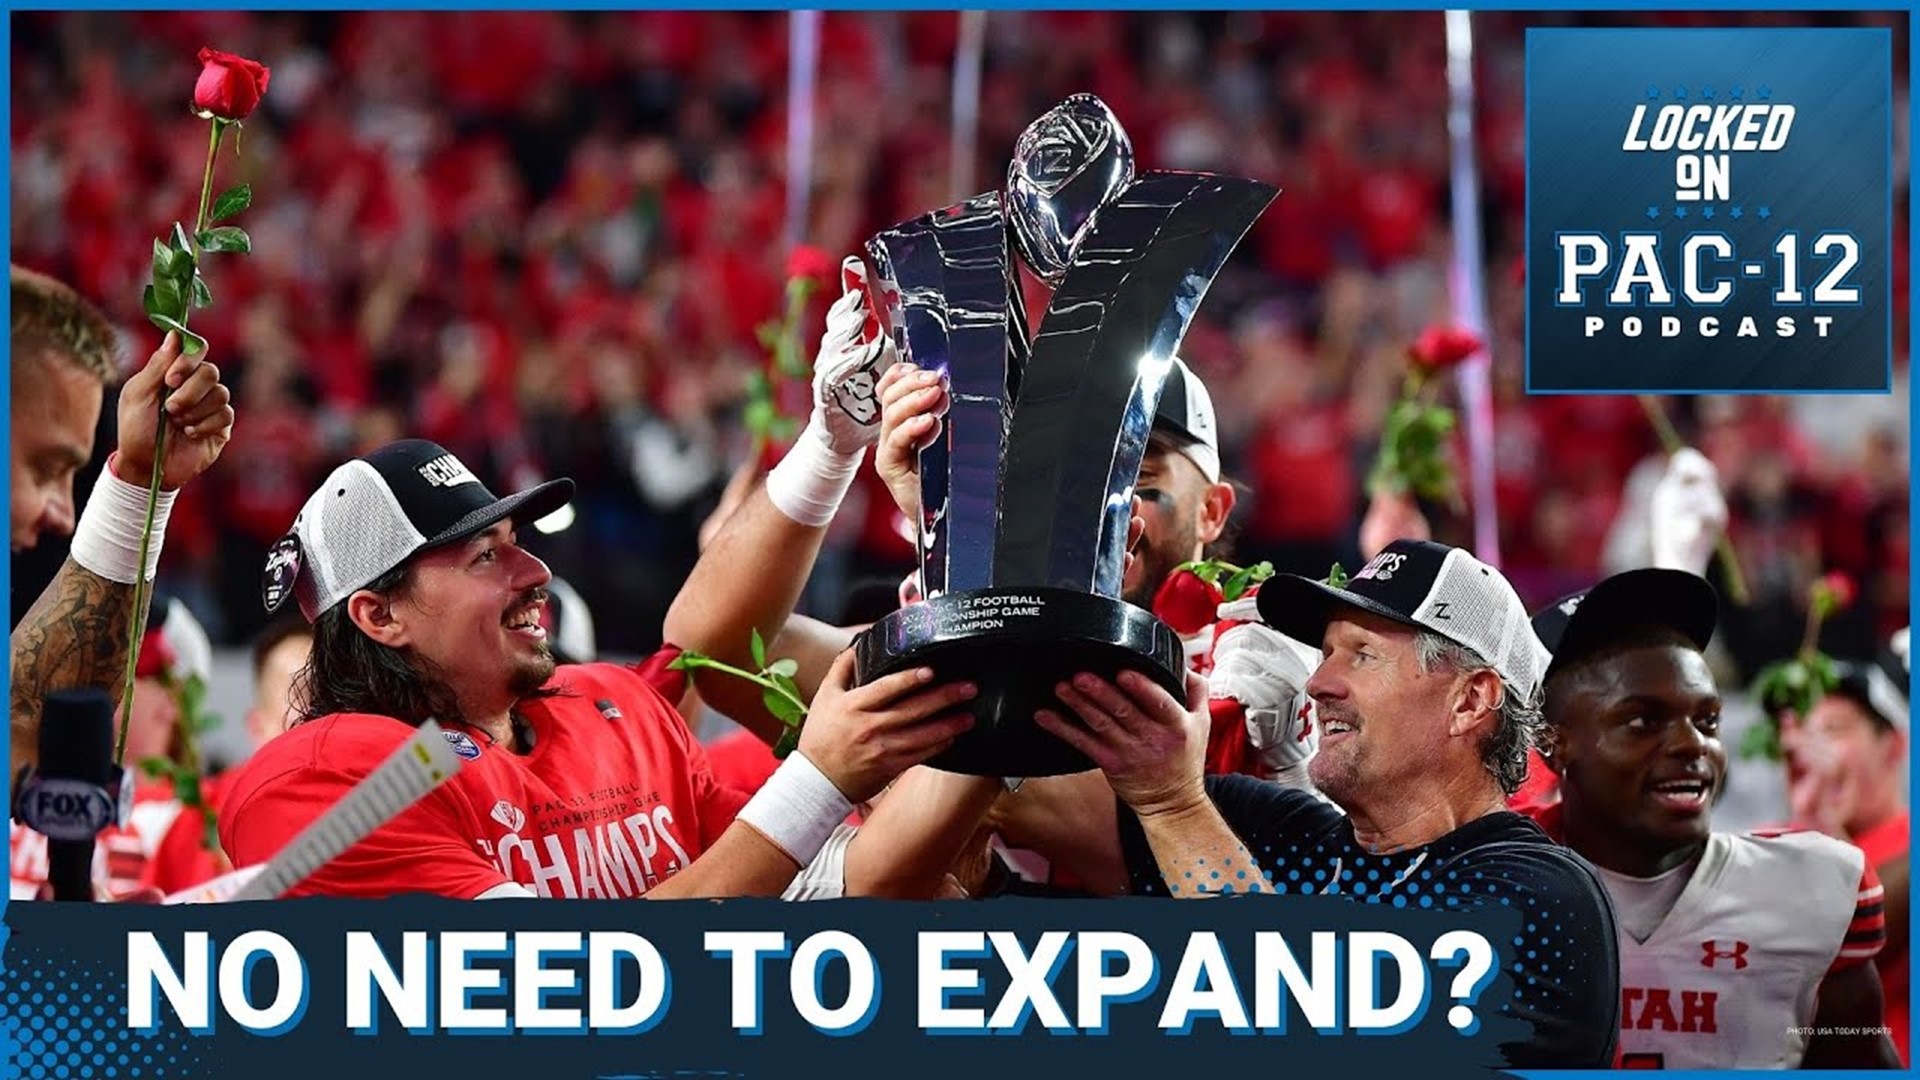 The options for the Pac-12 to expand in order to remain are numerous, but could the league decide to simply remain at 10 teams?